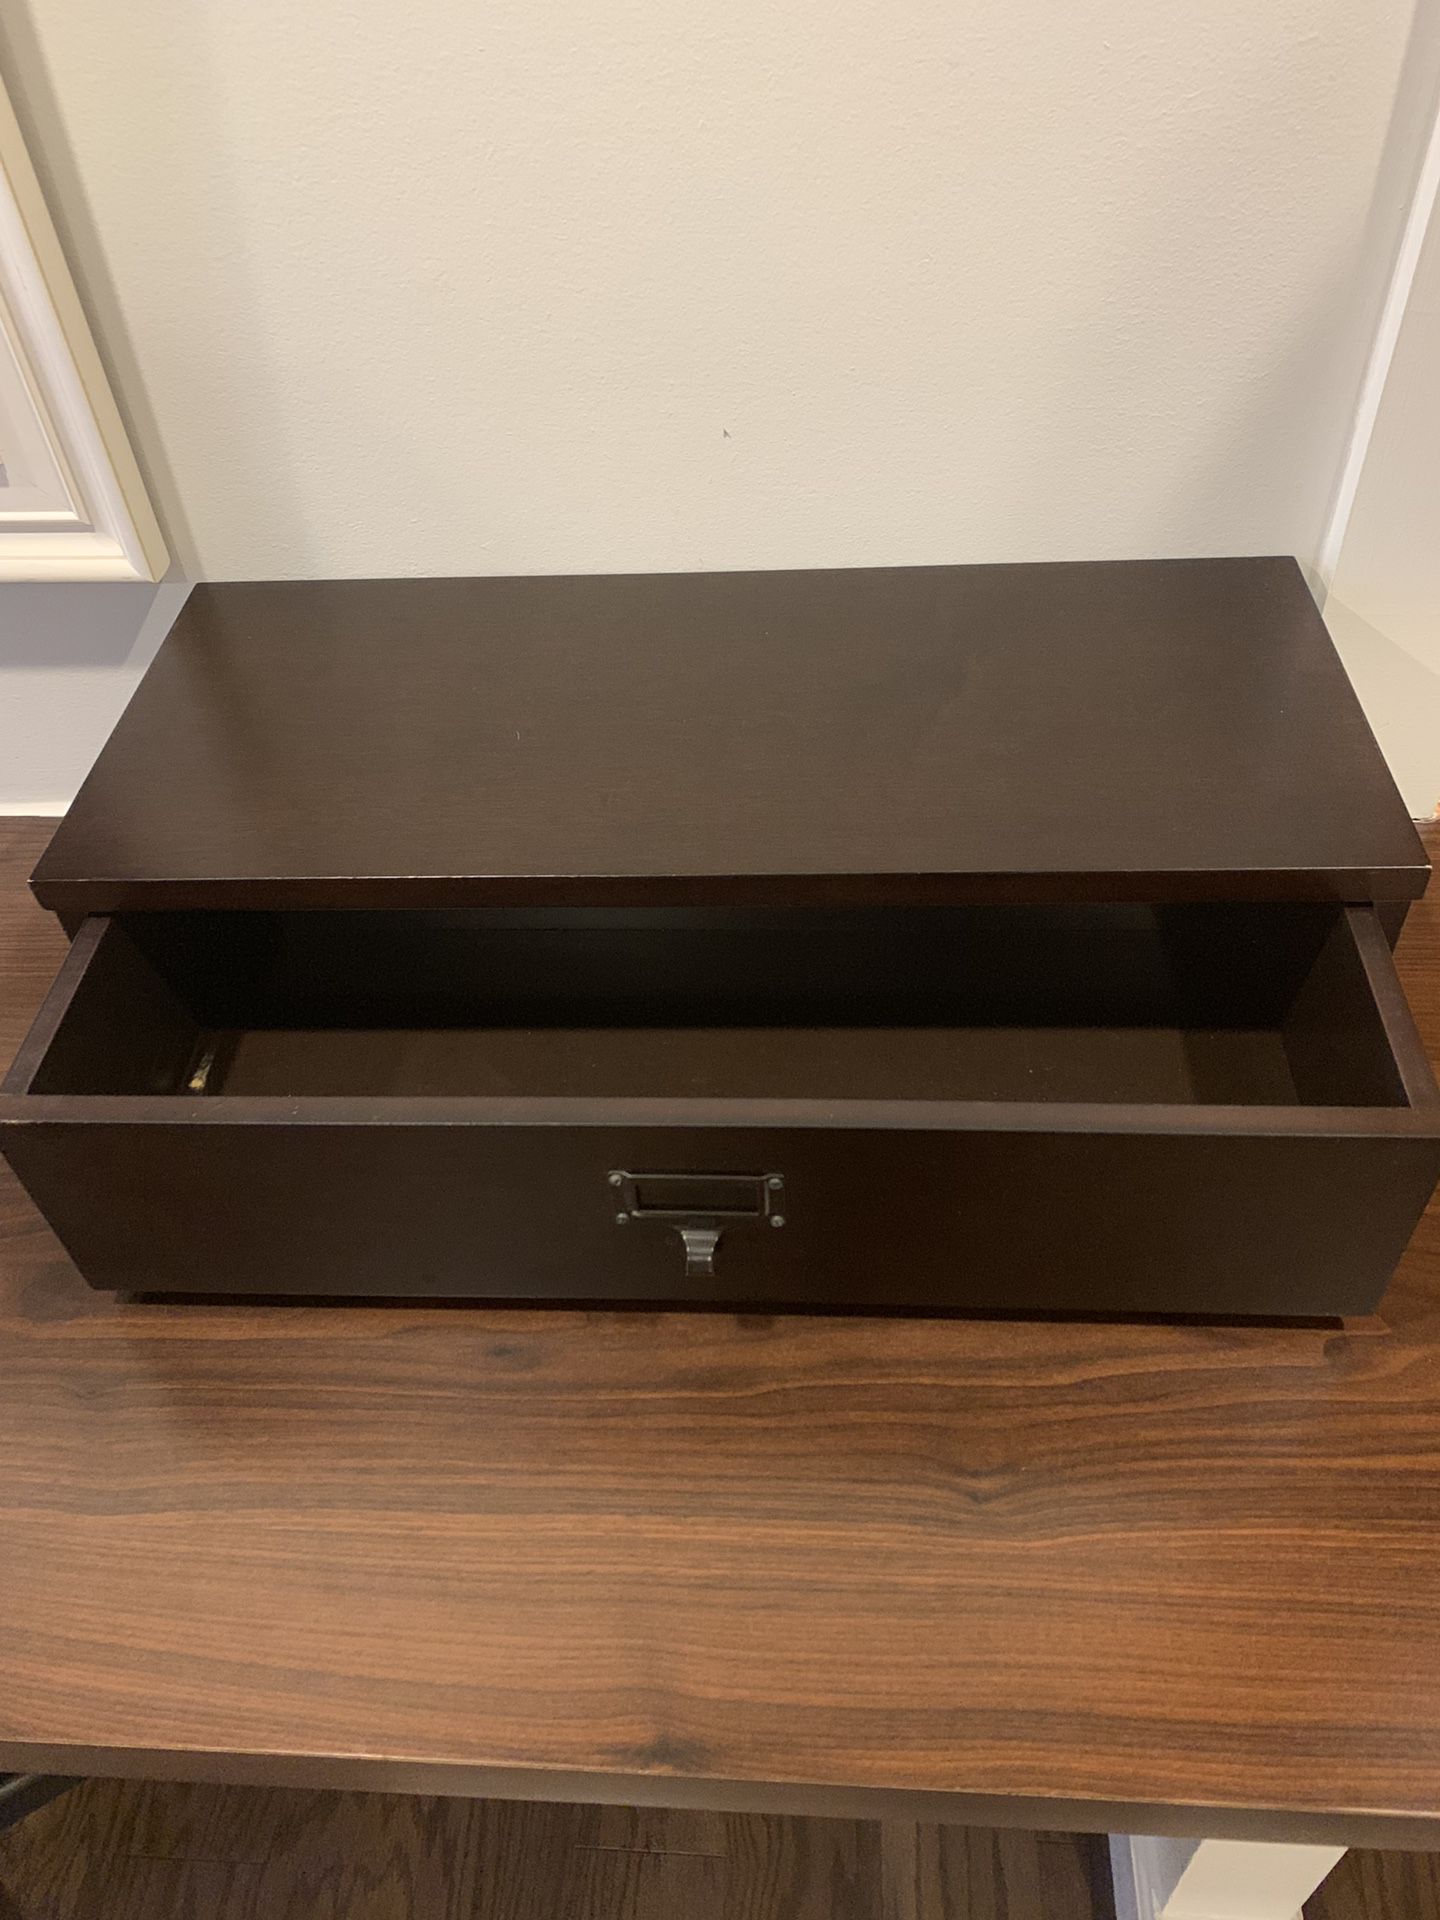 2 Pottery Barn detached desk drawers